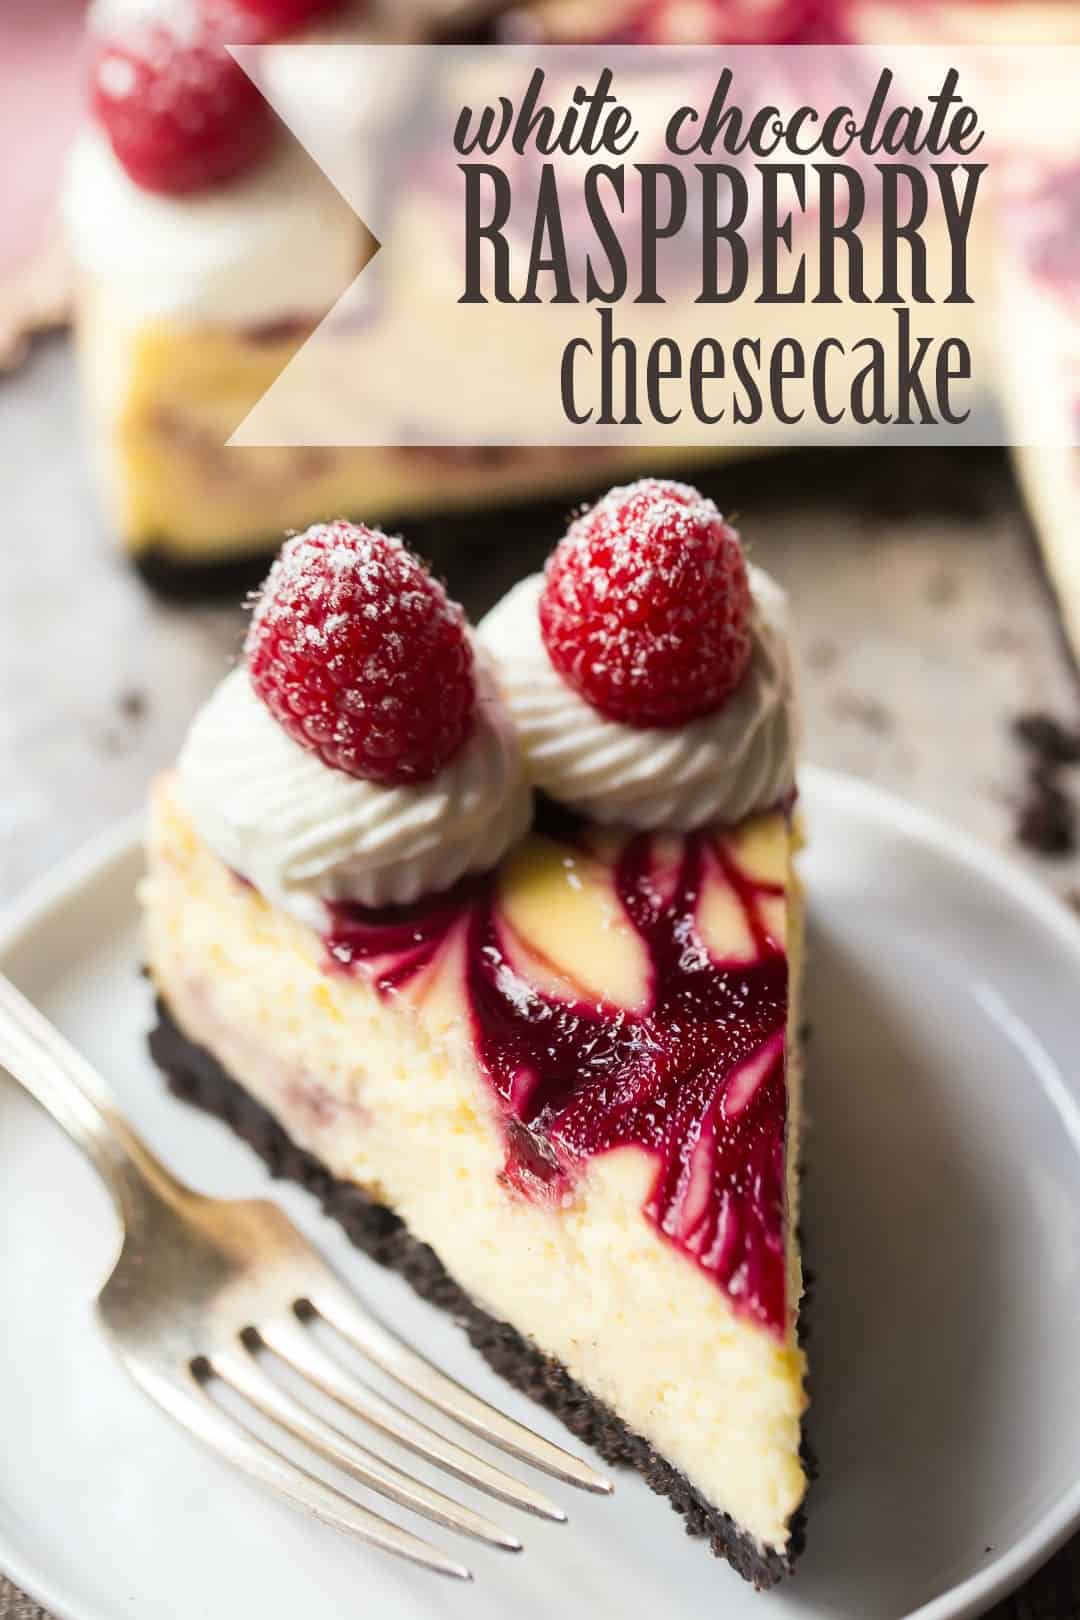 Slice of white chocolate raspberry truffle cheesecake with a text overlay above reading "White Chocolate Raspberry Cheesecake."